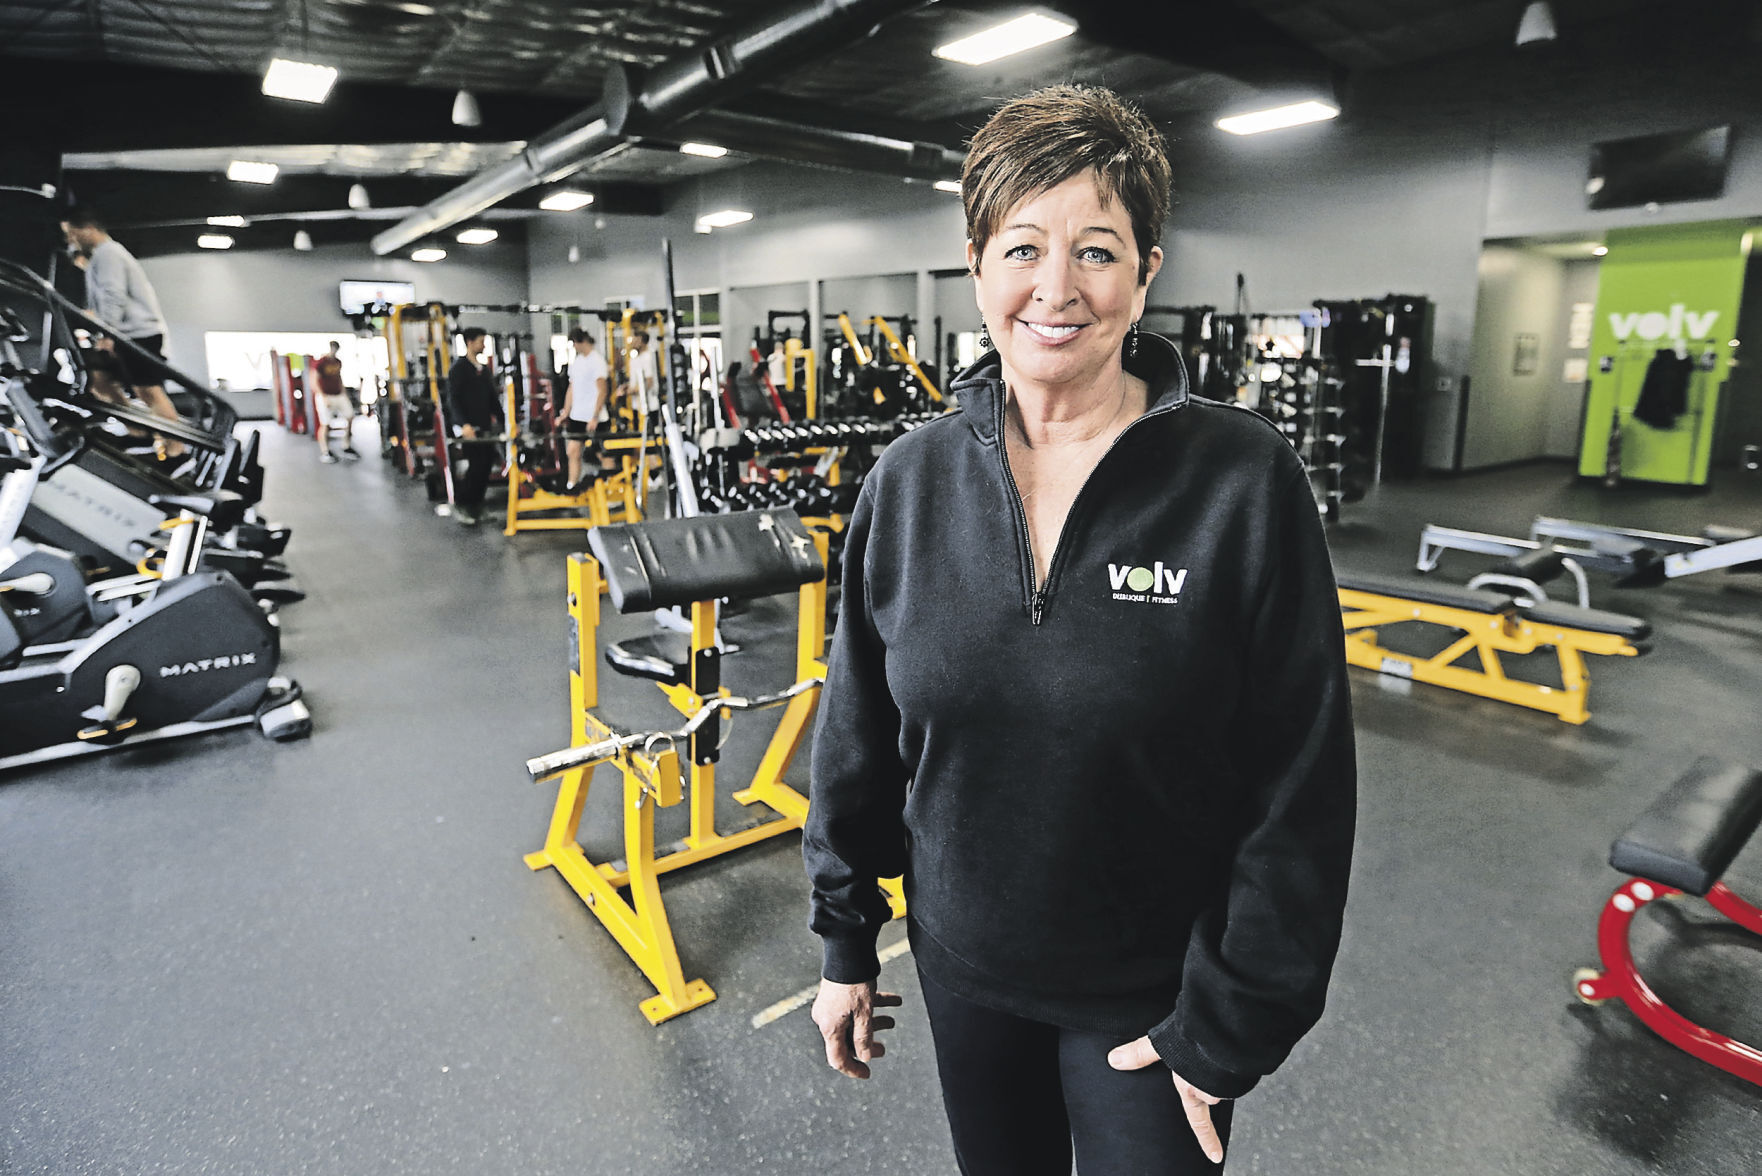 Kim David owns Volv Fitness in downtown Dubuque.    PHOTO CREDIT: JESSICA REILLY